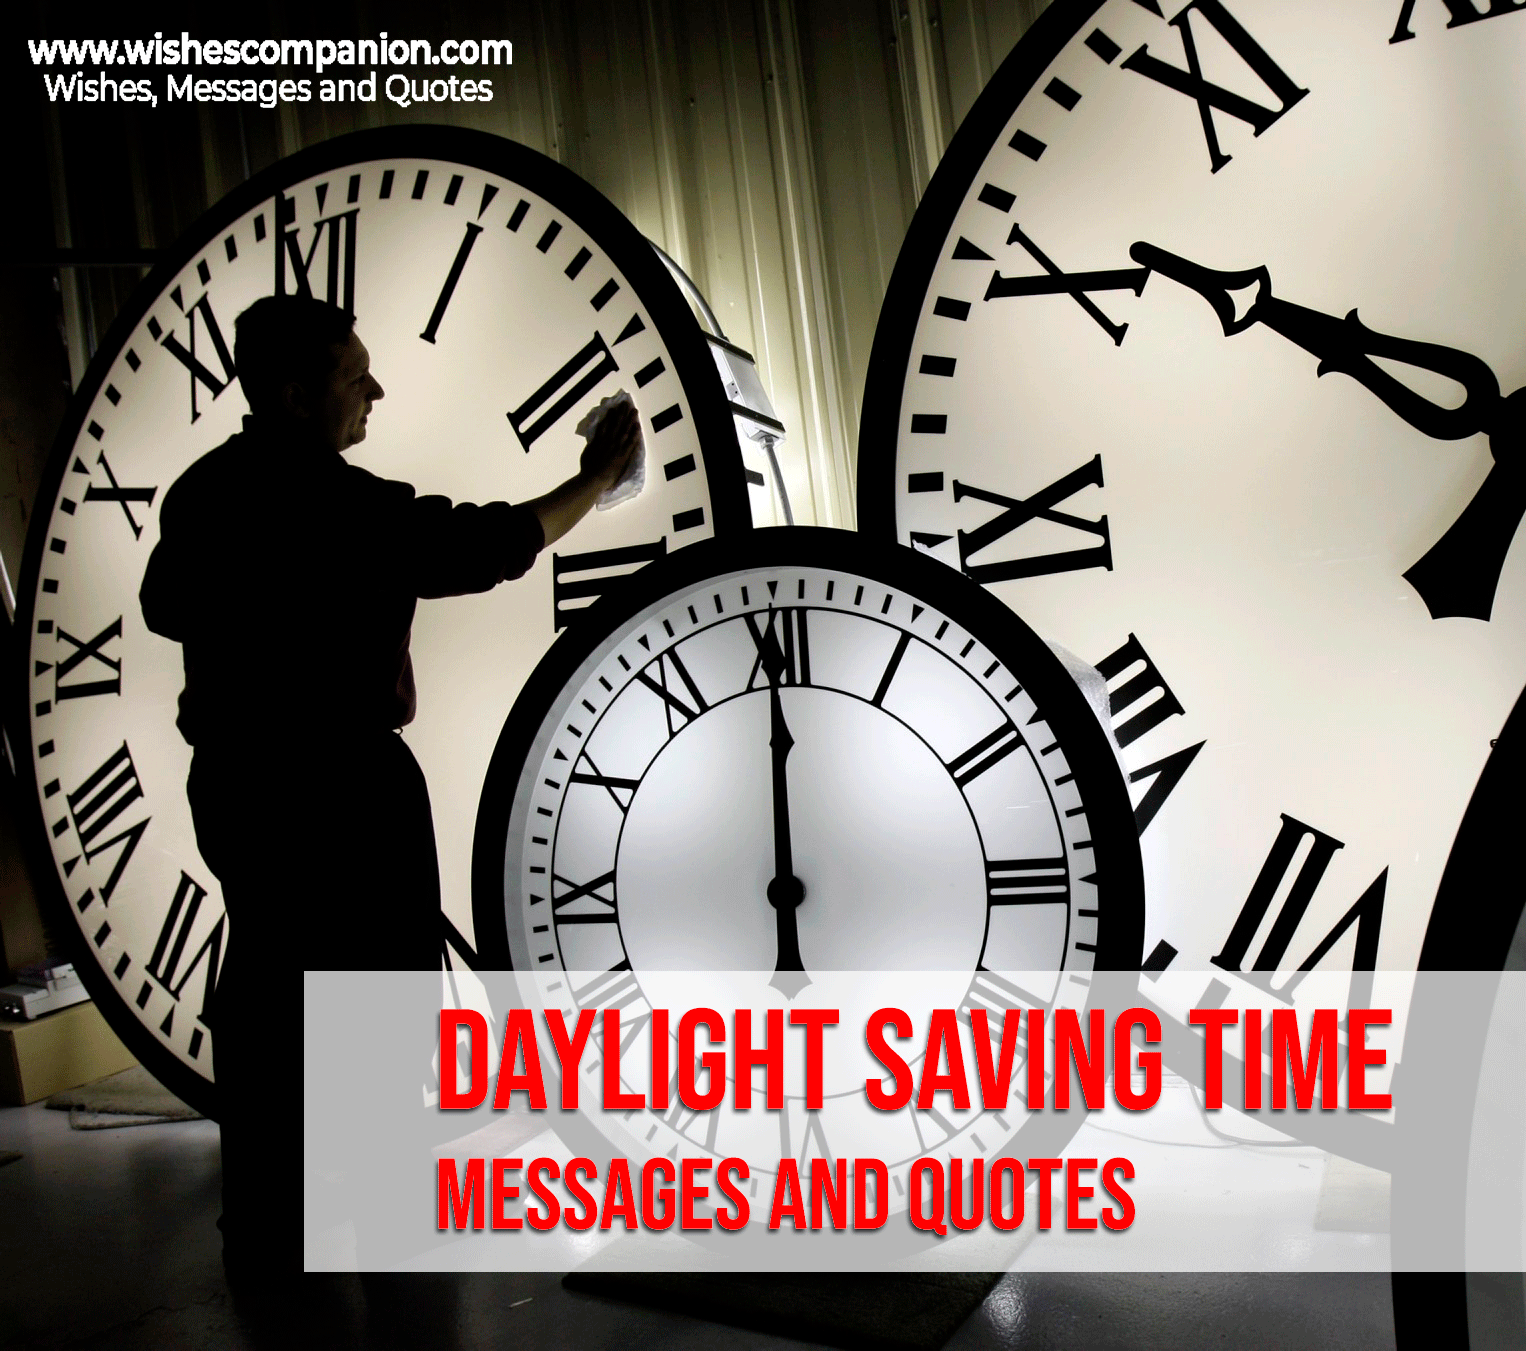 Daylight Saving Time Messages and Quotes